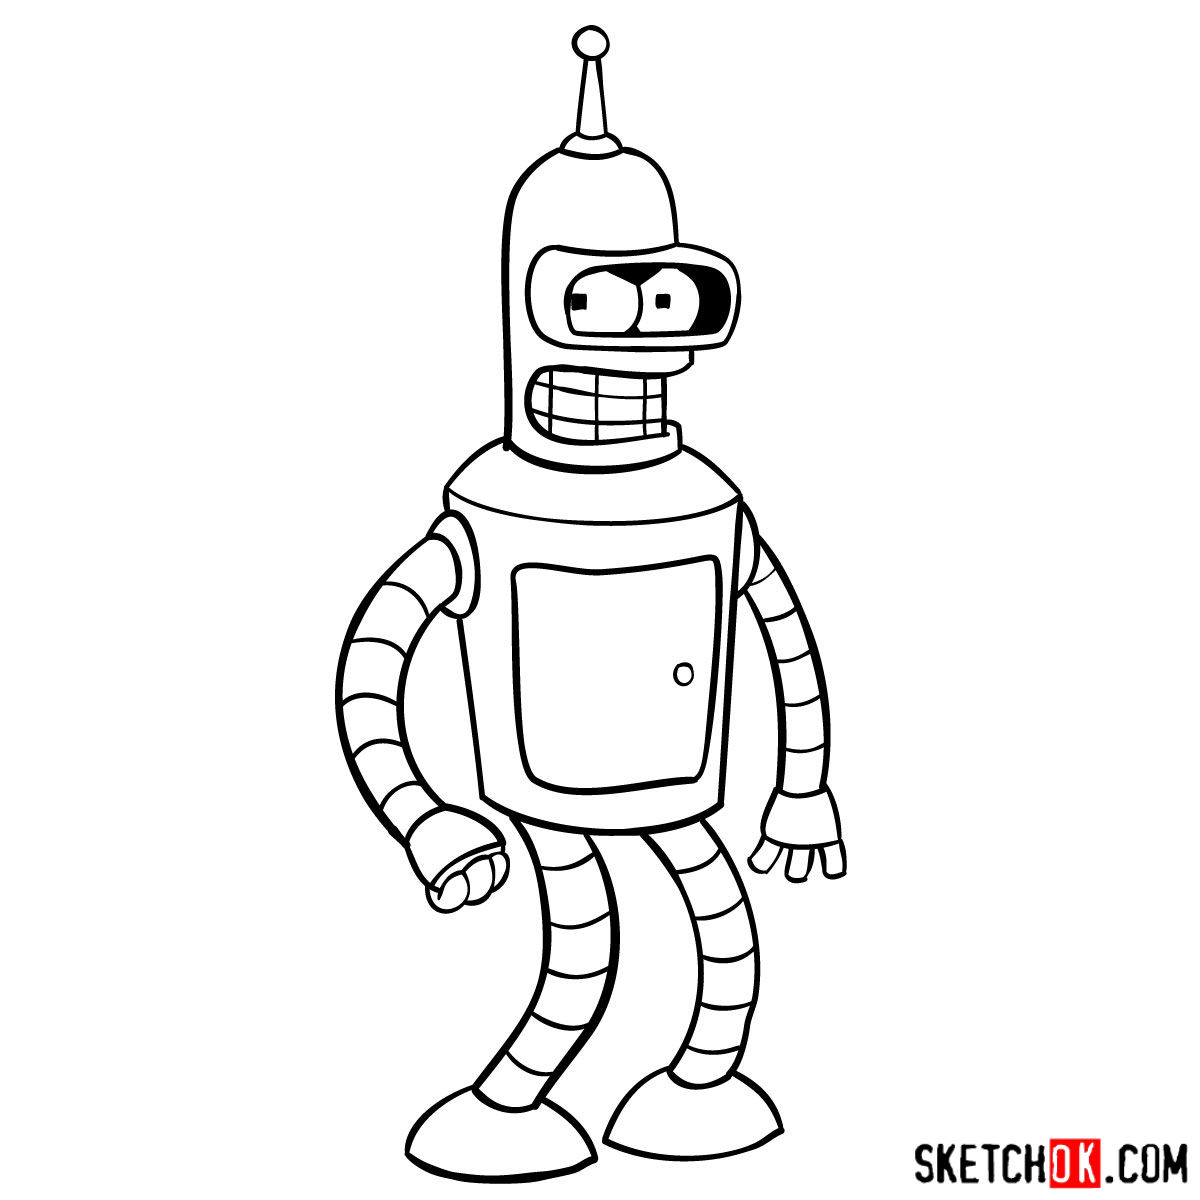 How to draw Bender Rodríguez - step 11